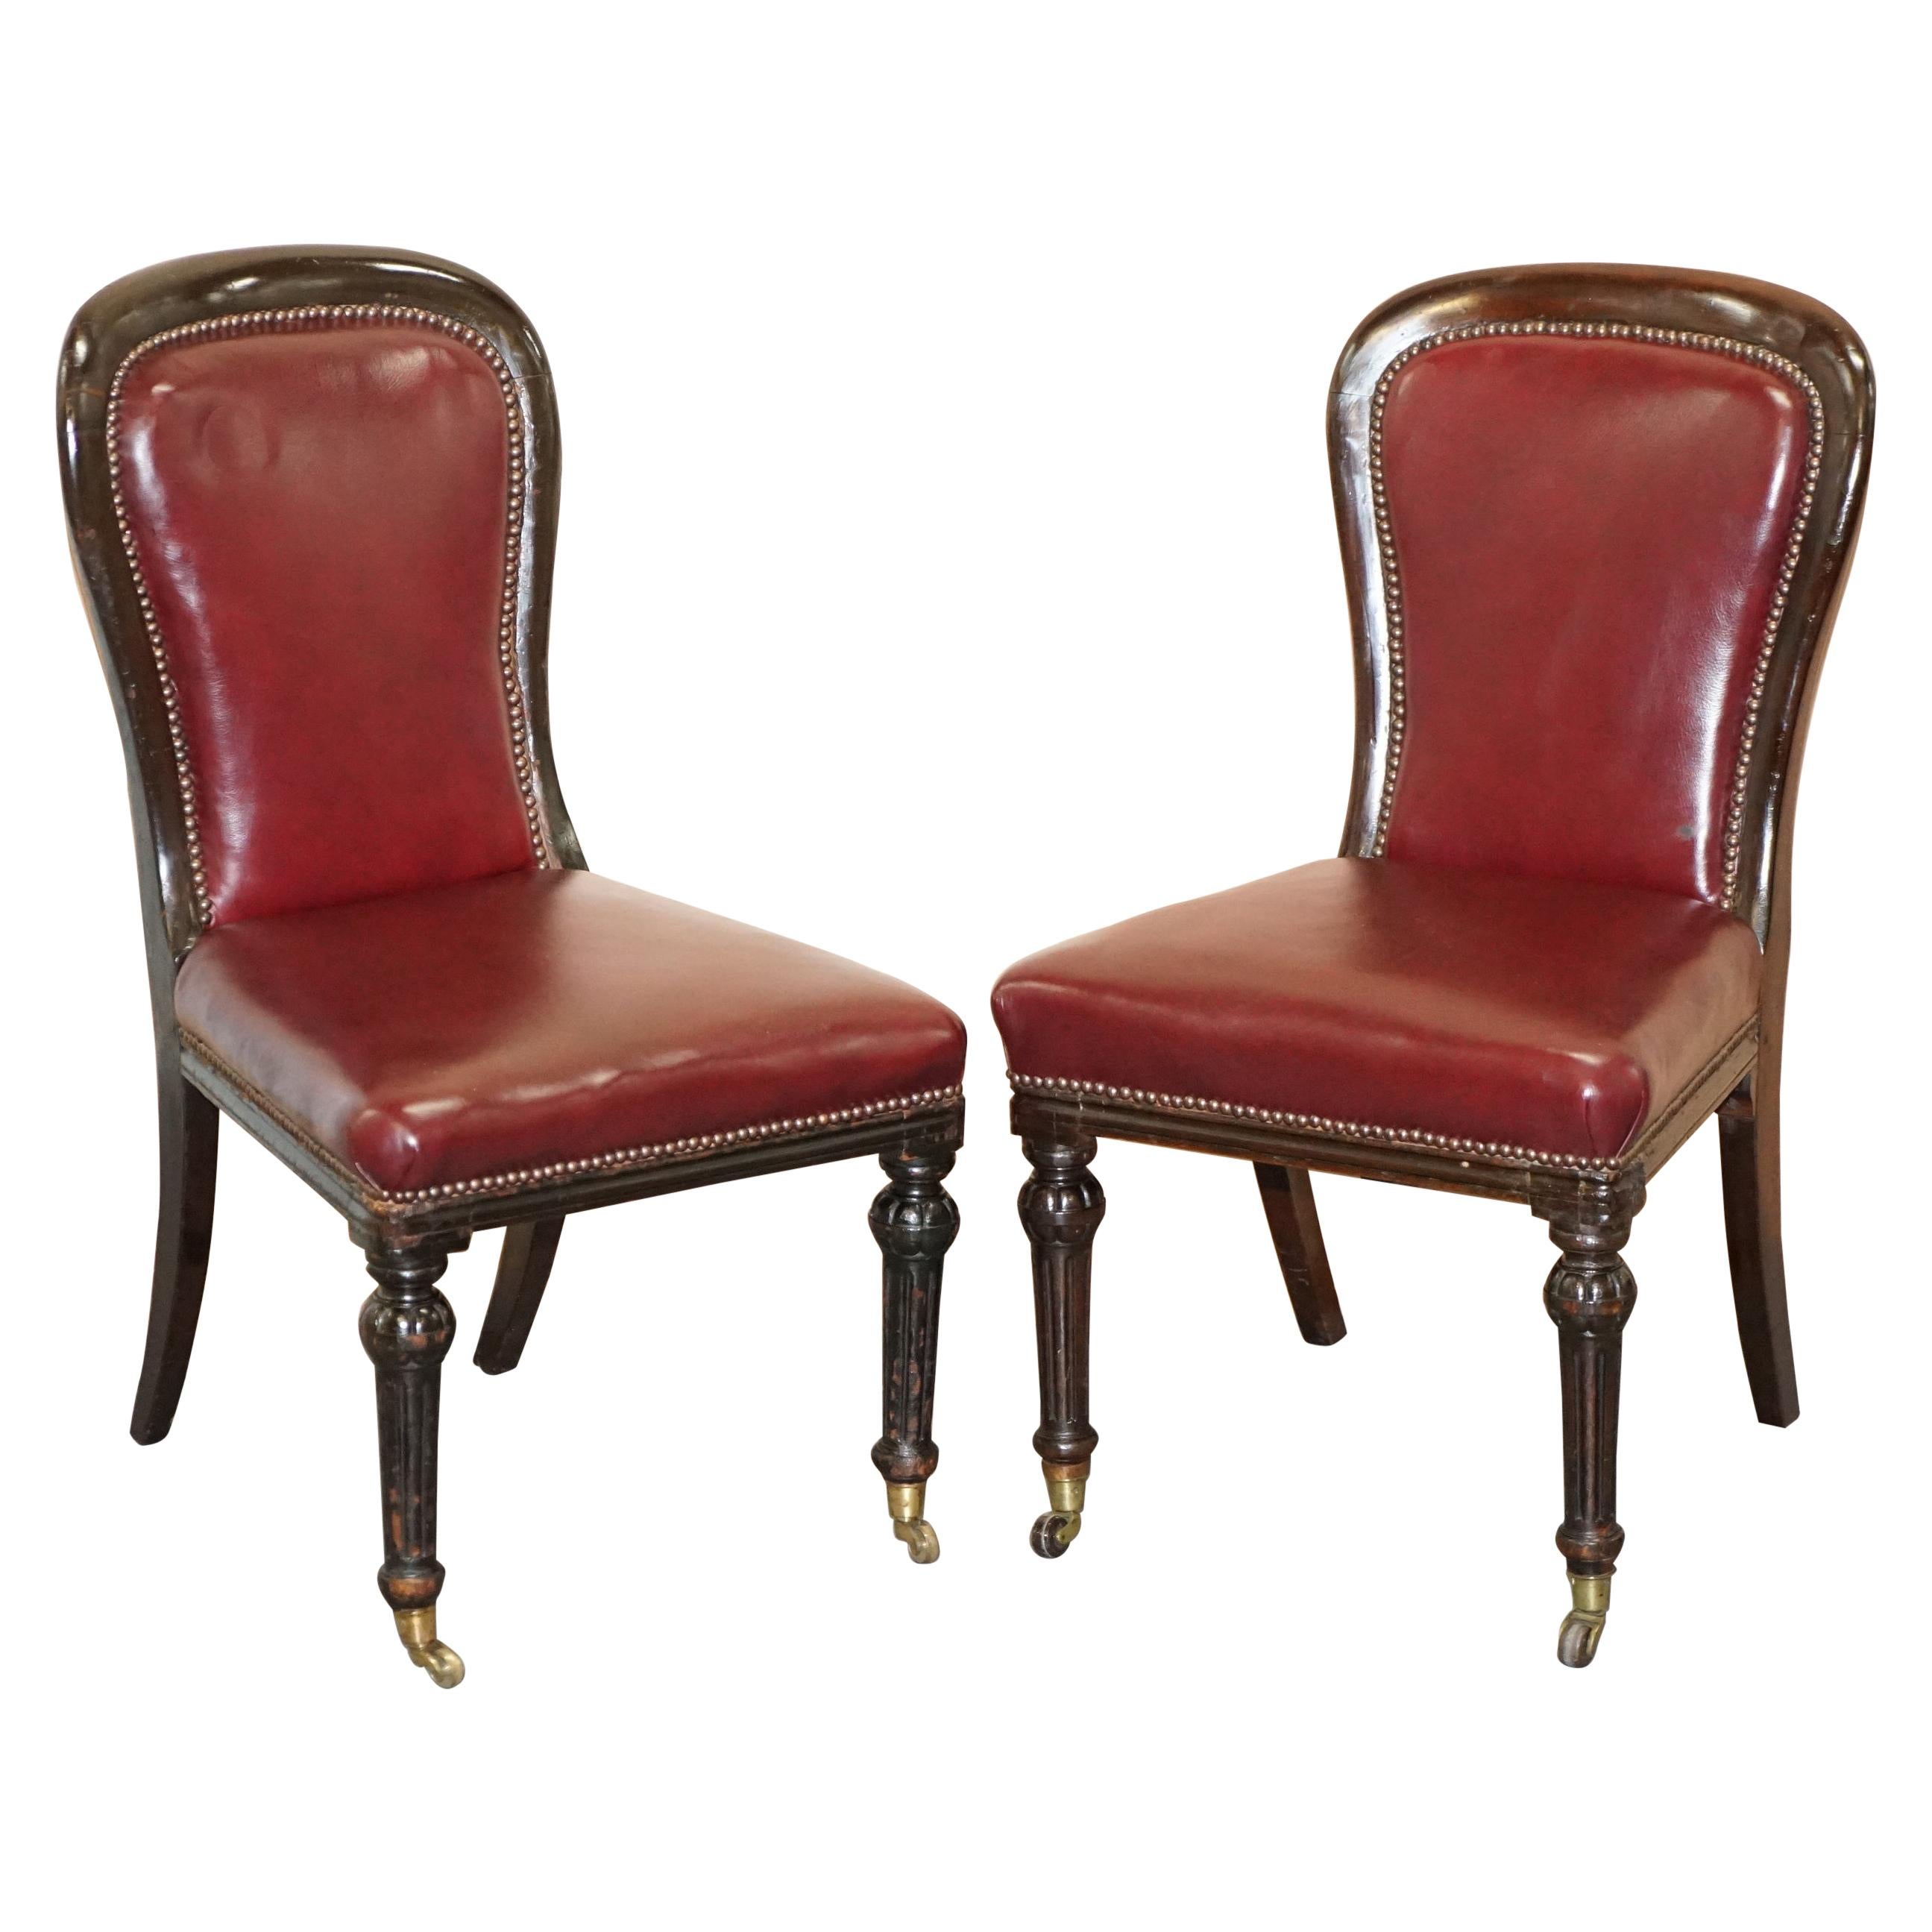 Pair of Mahogany Framed Oxblood Leather Medallion Back Side Occasional Chairs